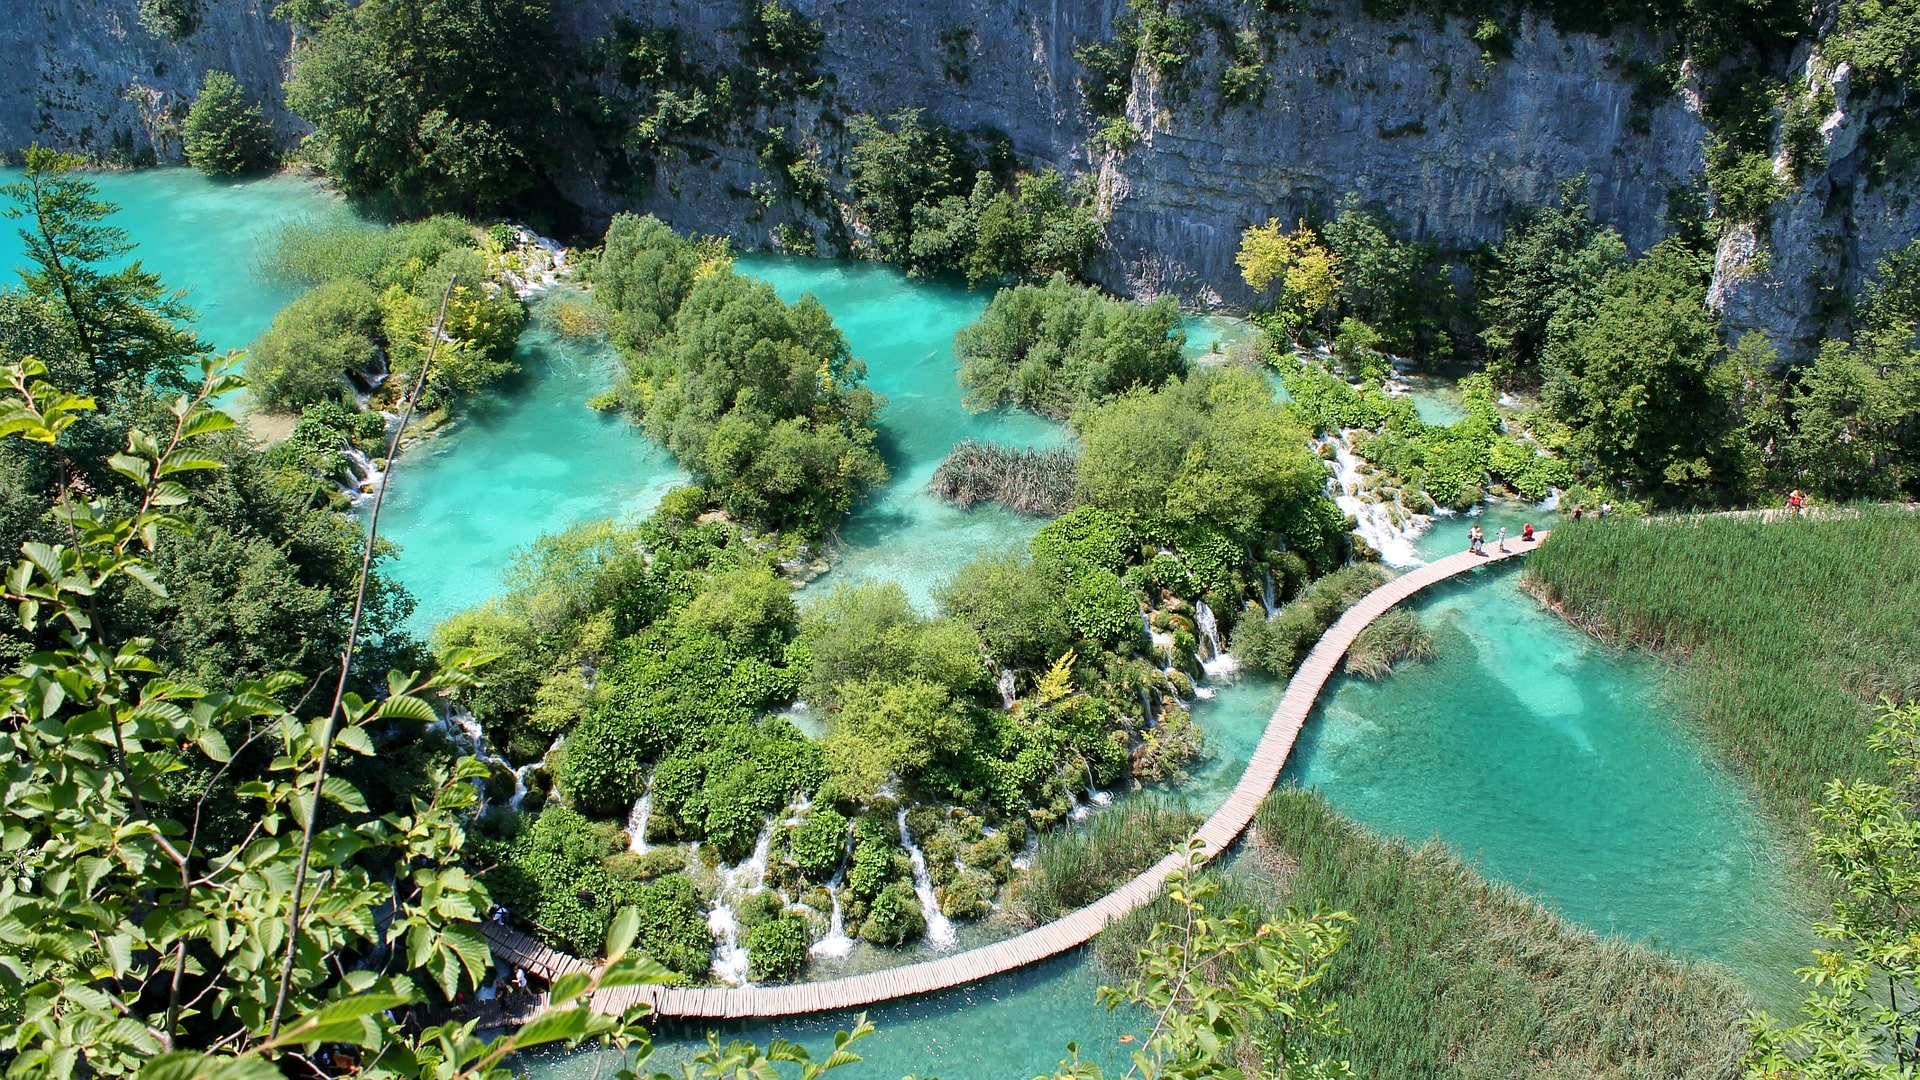 Plitvice Lakes National Park is one of the best places to visit in Croatia